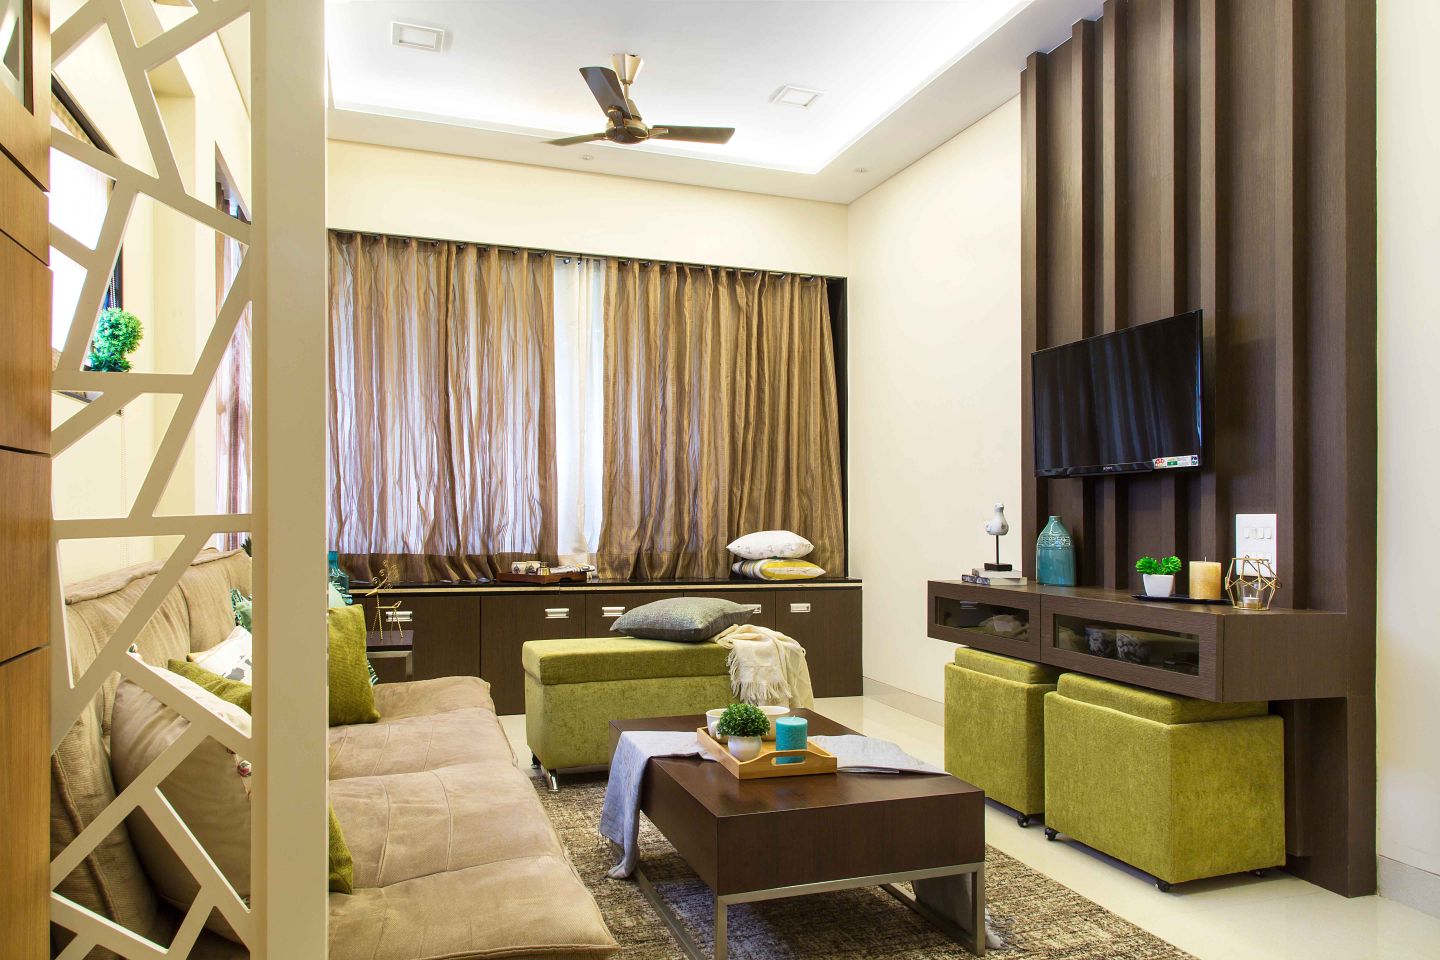 2-BHK Flat In Mumbai With Beige And Green Living Room - Livspace